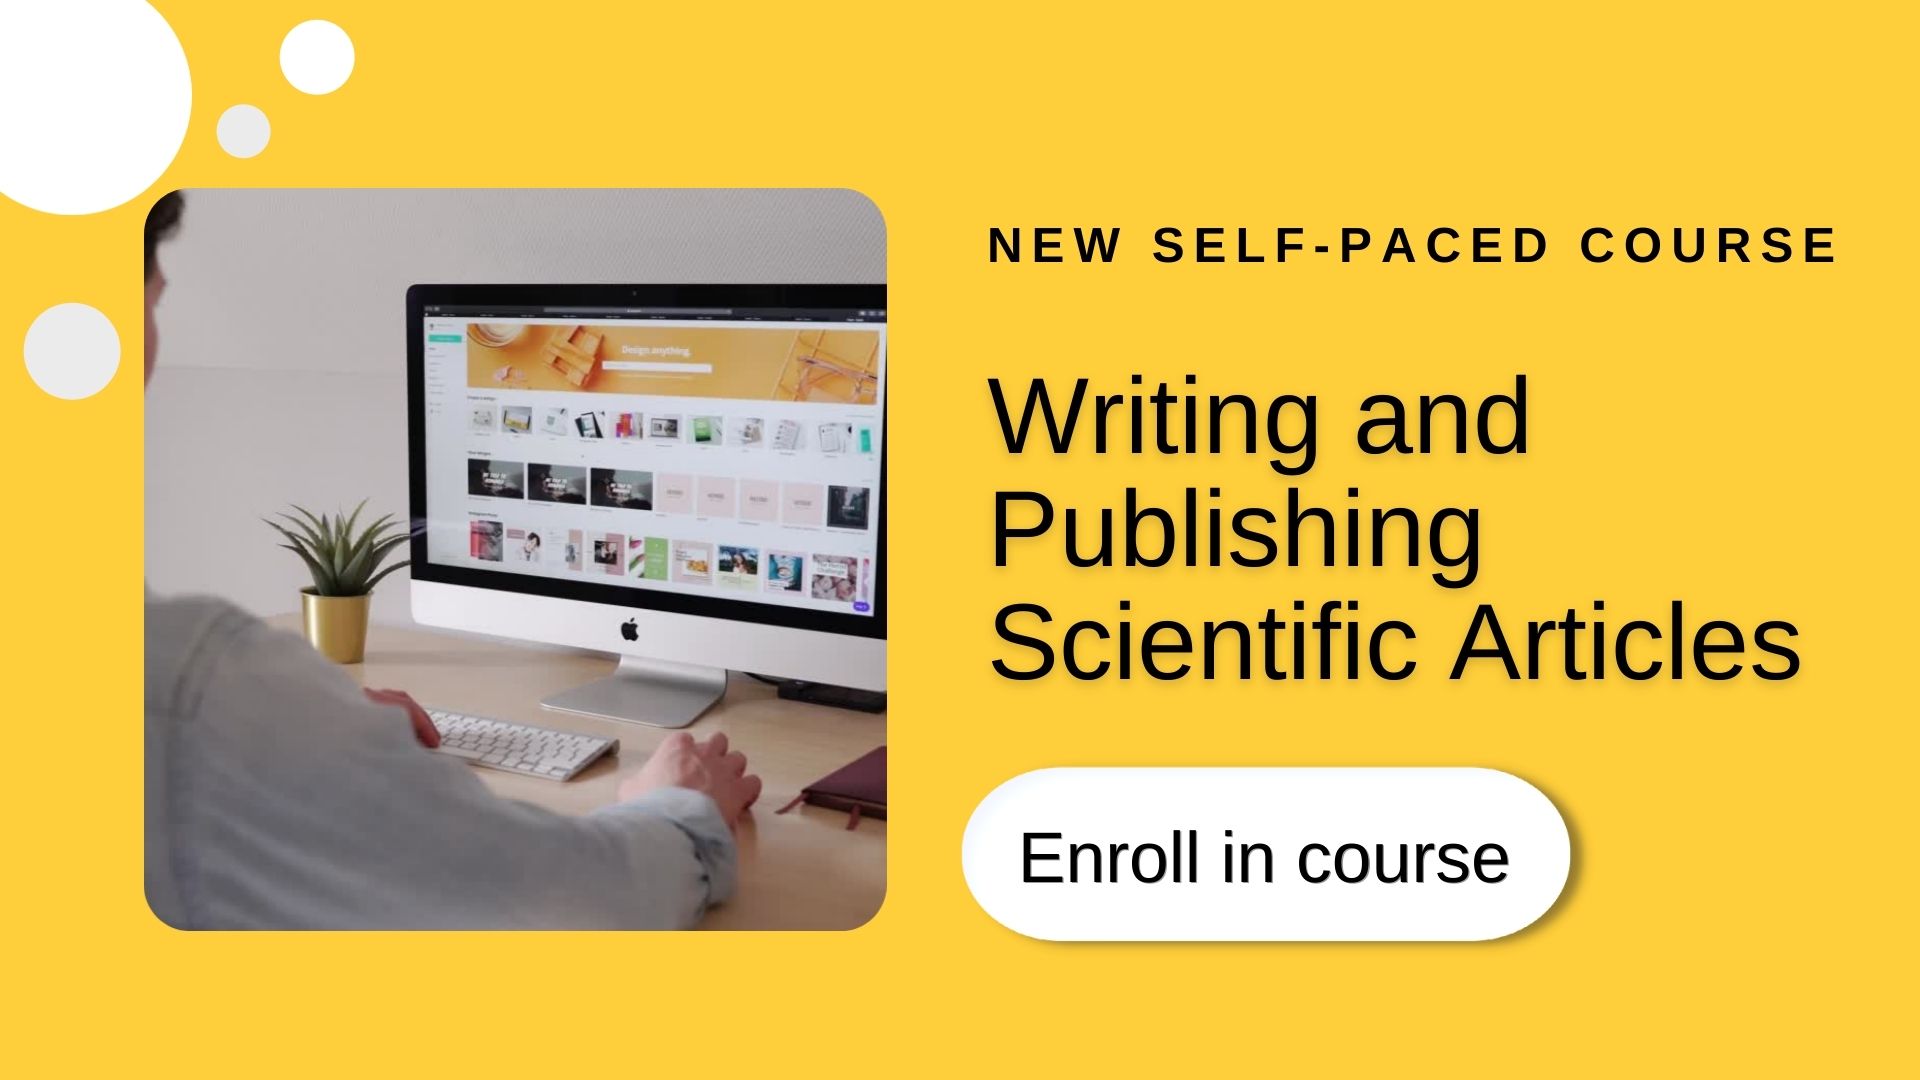 New Self-paced course: Writing and Publishing Scientific Articles. Enroll in course.